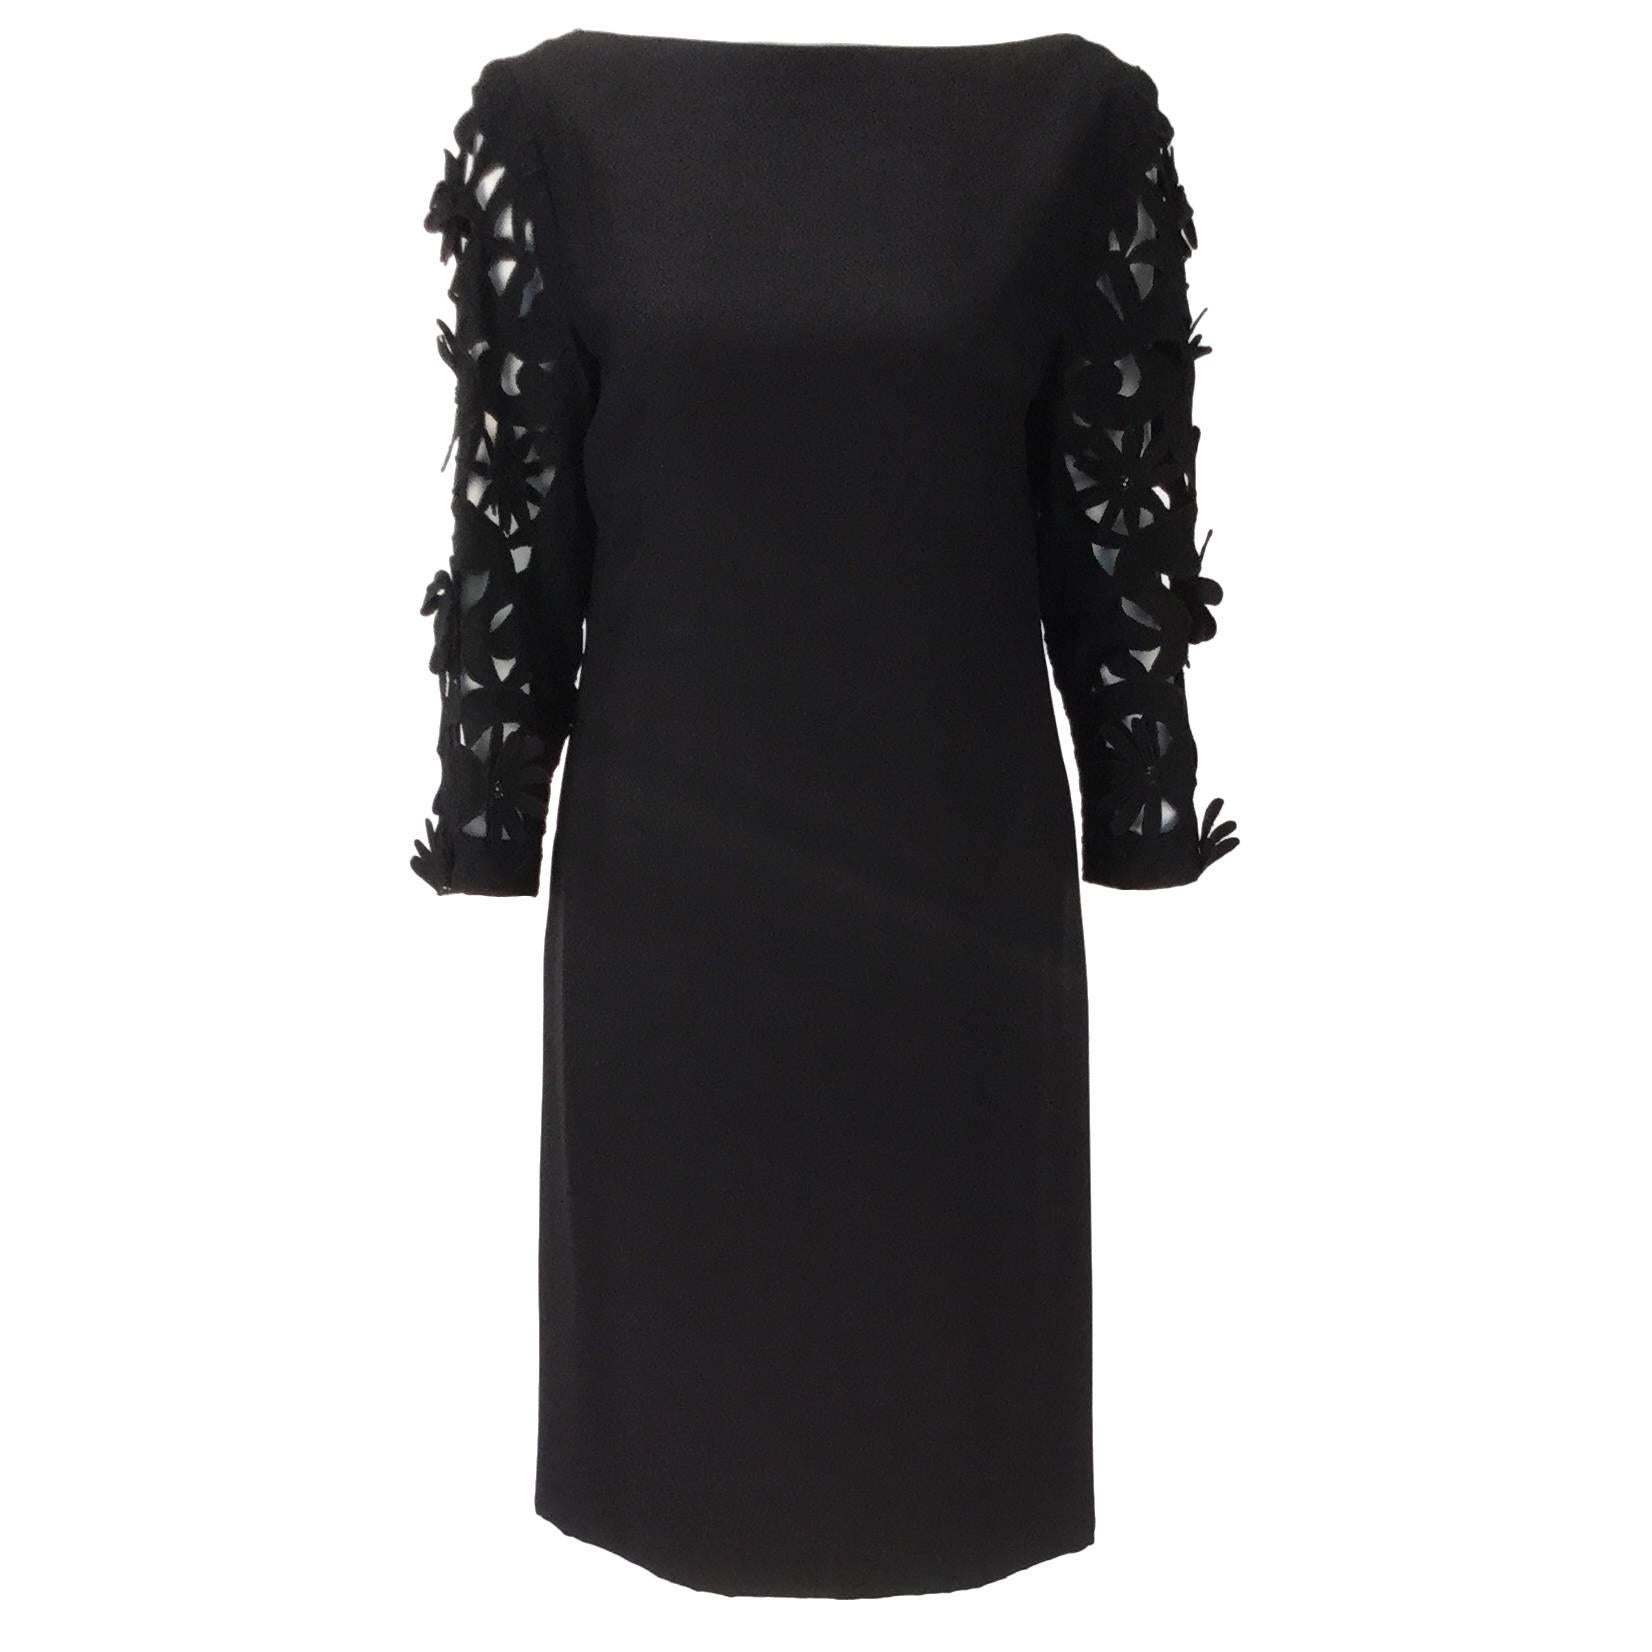 1970s Renato Balestra  Black  Dress with Floral Cutout Sleeves For Sale